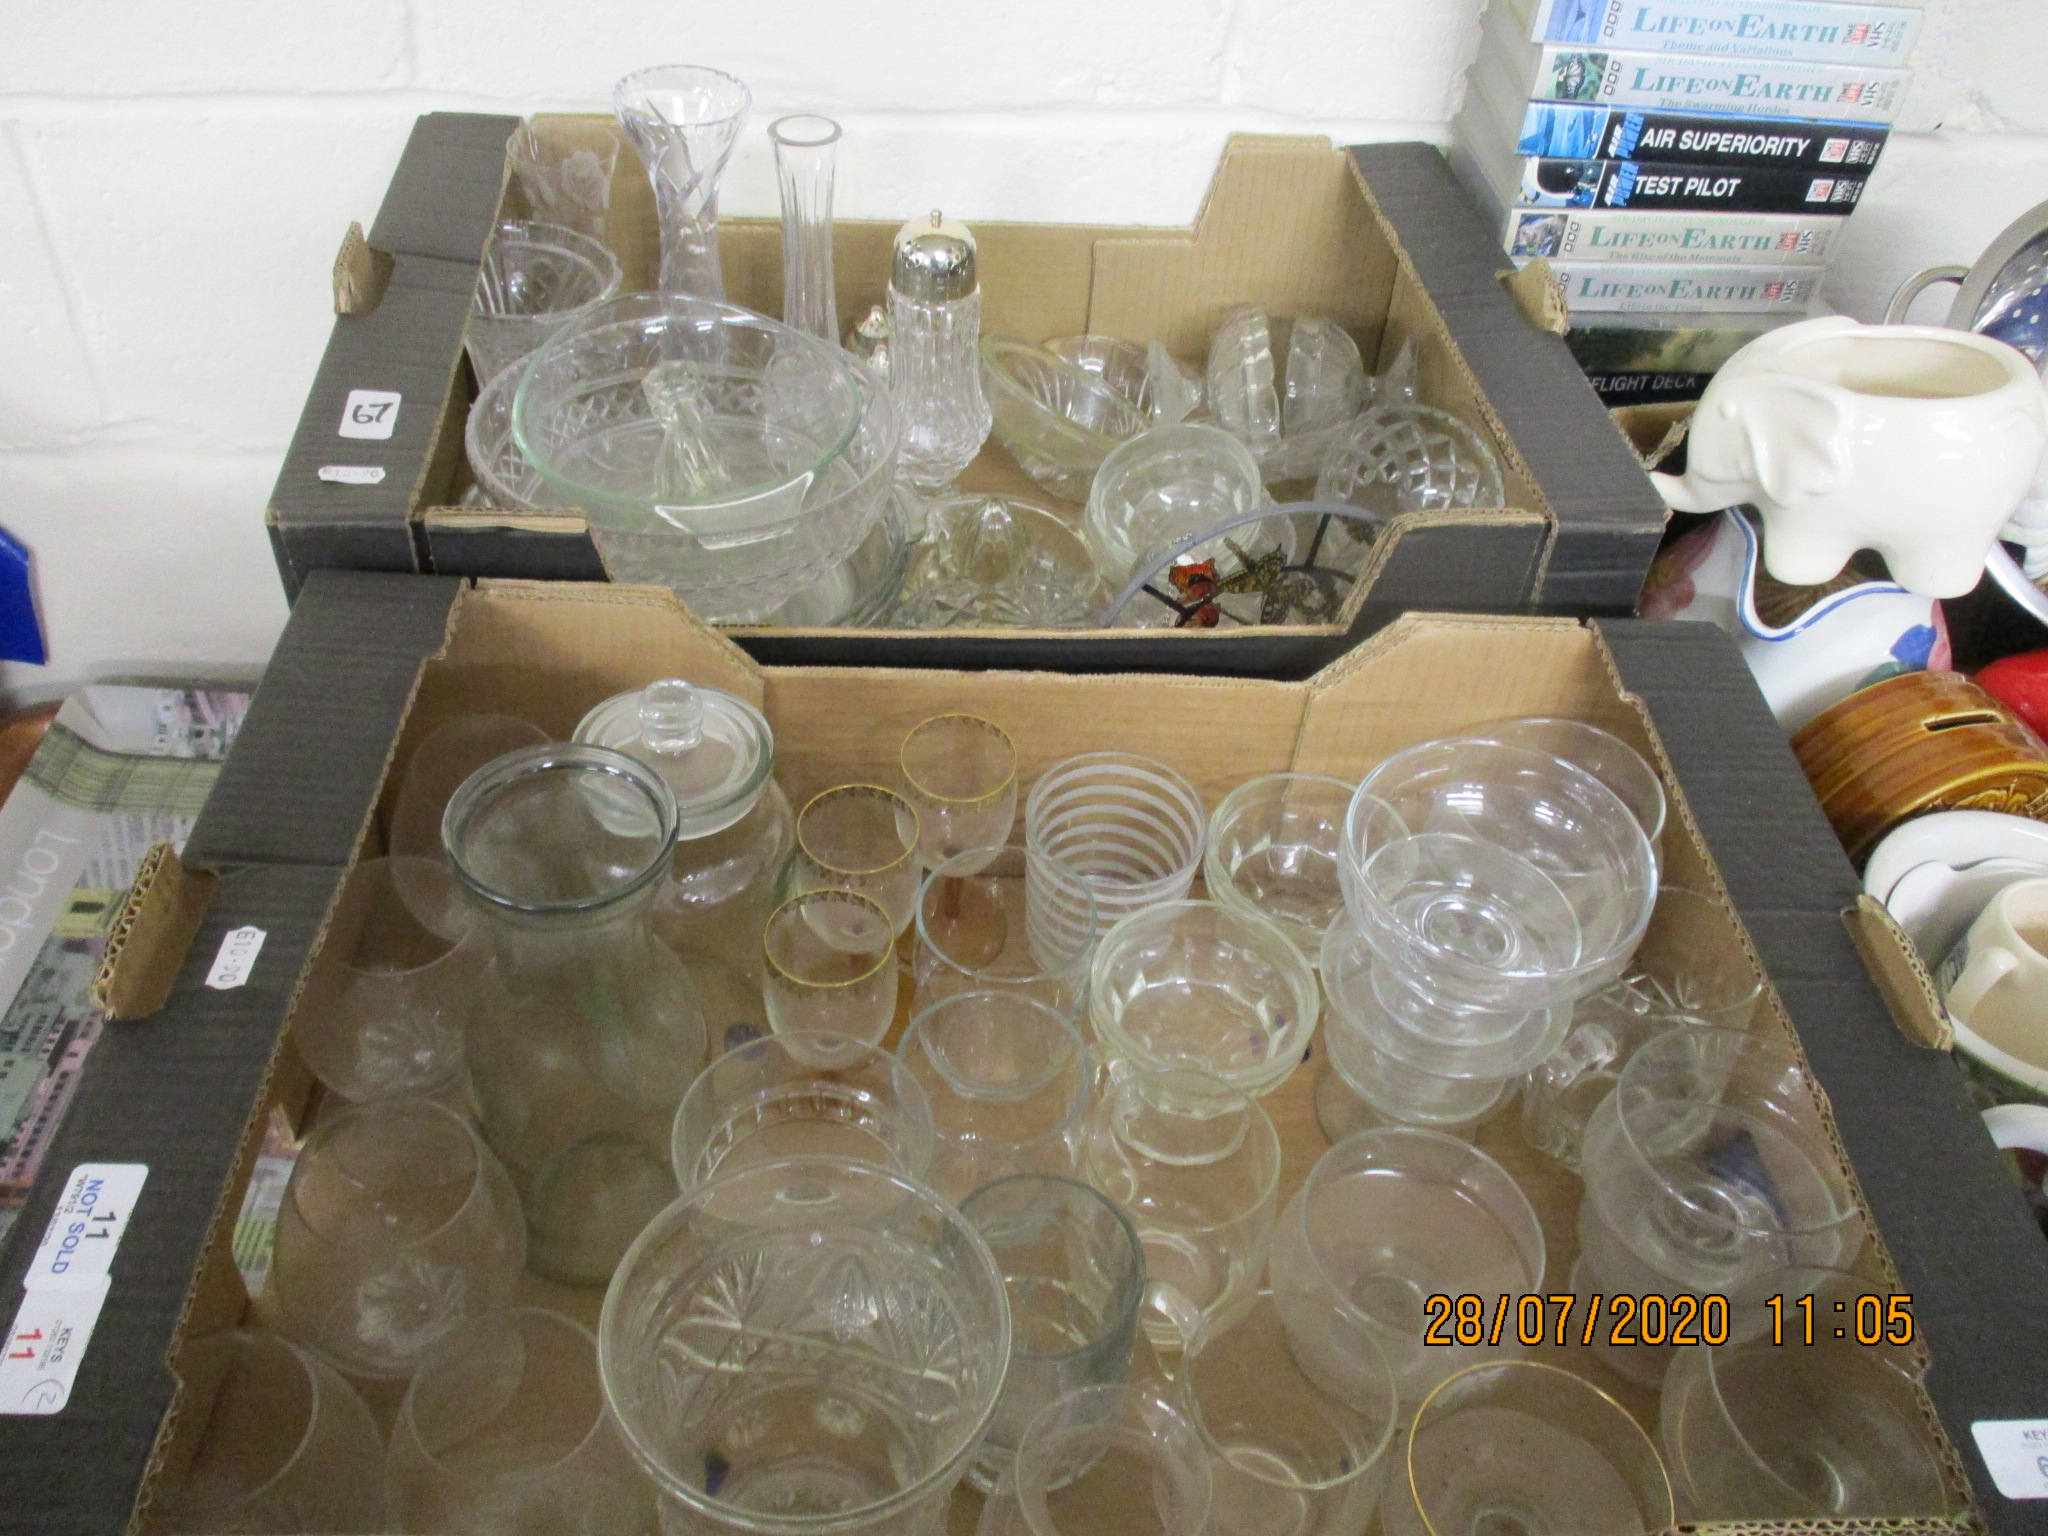 TWO BOXES VARIOUS GLASSWARE INCLUDING DRINKING GLASSES, TUREENS, SIFTER ETC